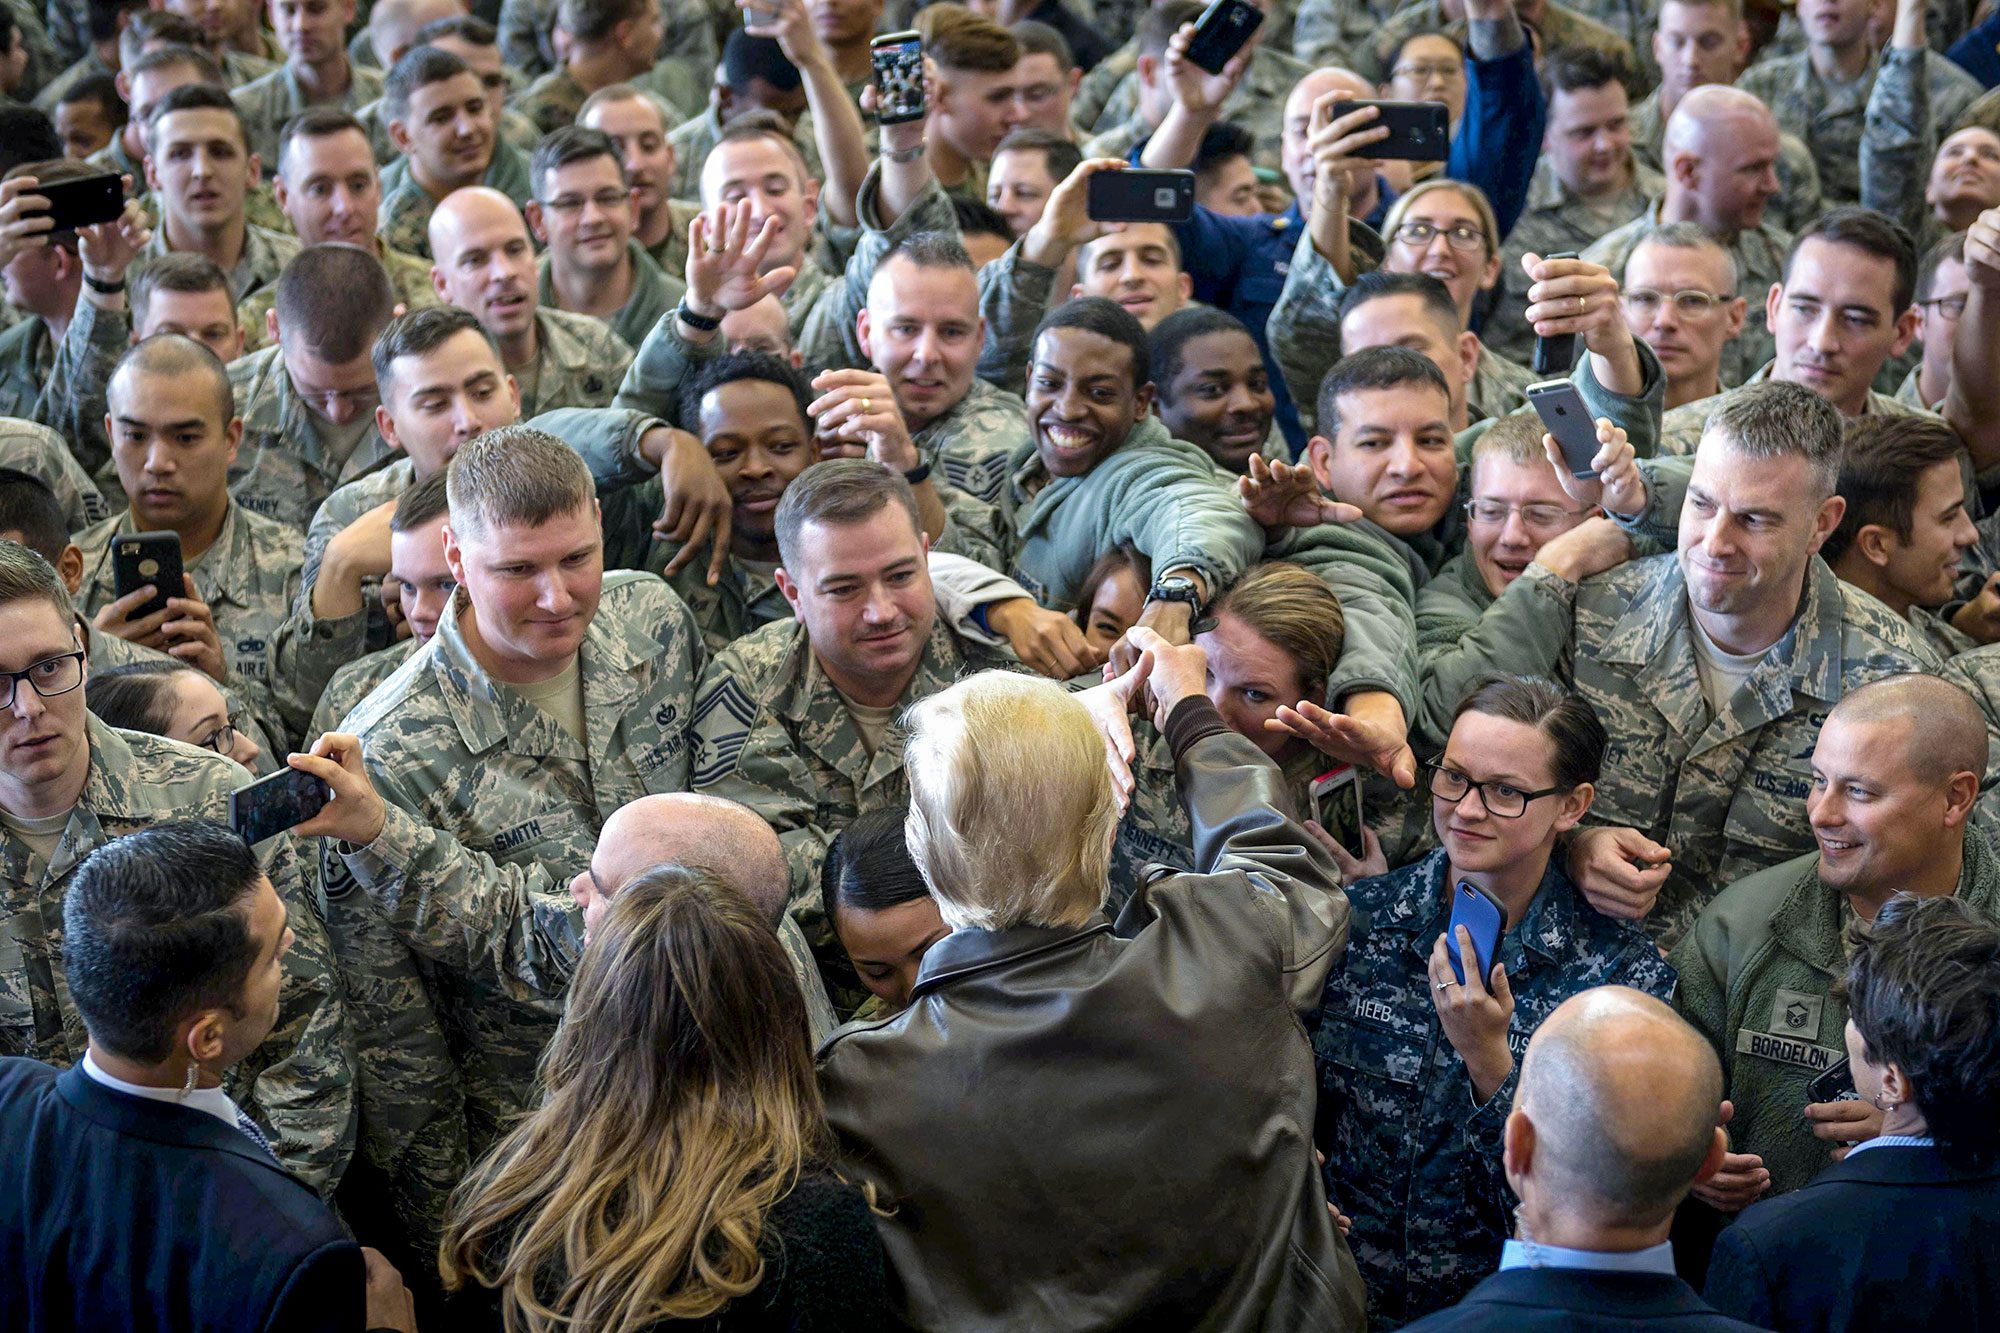 President Donald J. Trump greets service members during a troop talk at Yokota Air Base, Japan, Nov. 5, 2017. During his talk, Trump highlighted the importance of the U.S. – Japan alliance in the Indo-Asia Pacific region. Air Force photo by Airman 1st Class Juan Torres